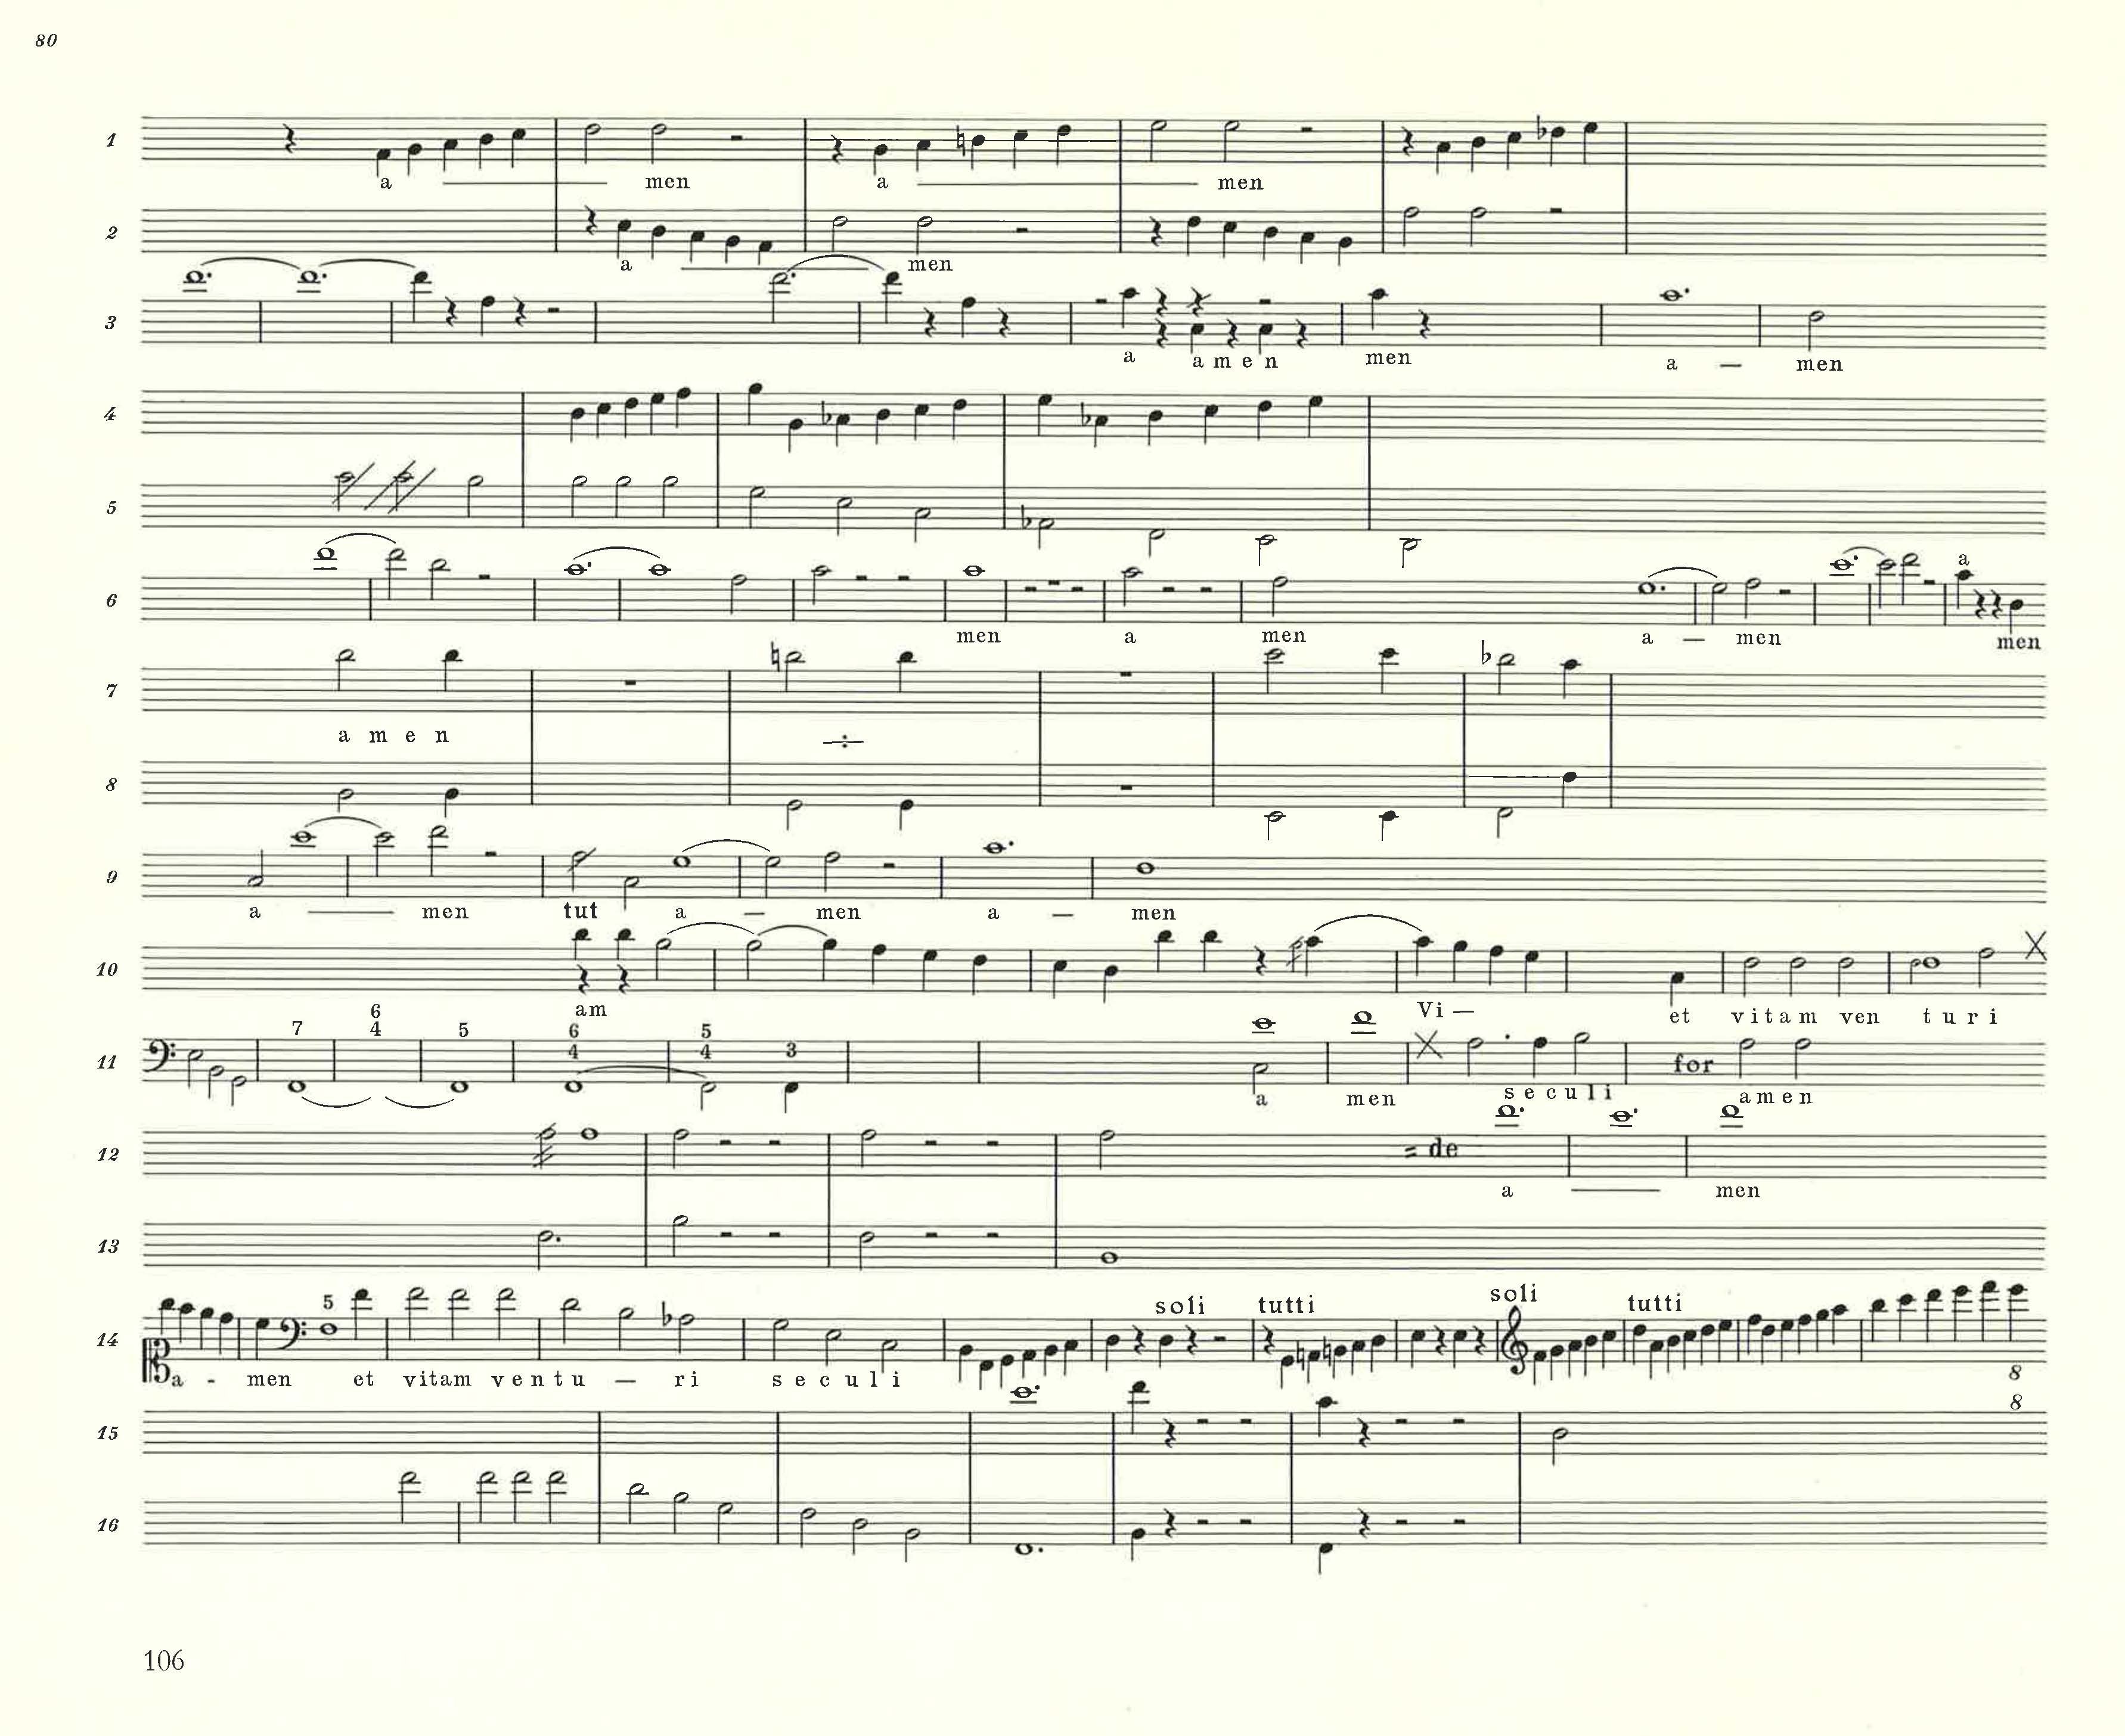 A page of typed music score.